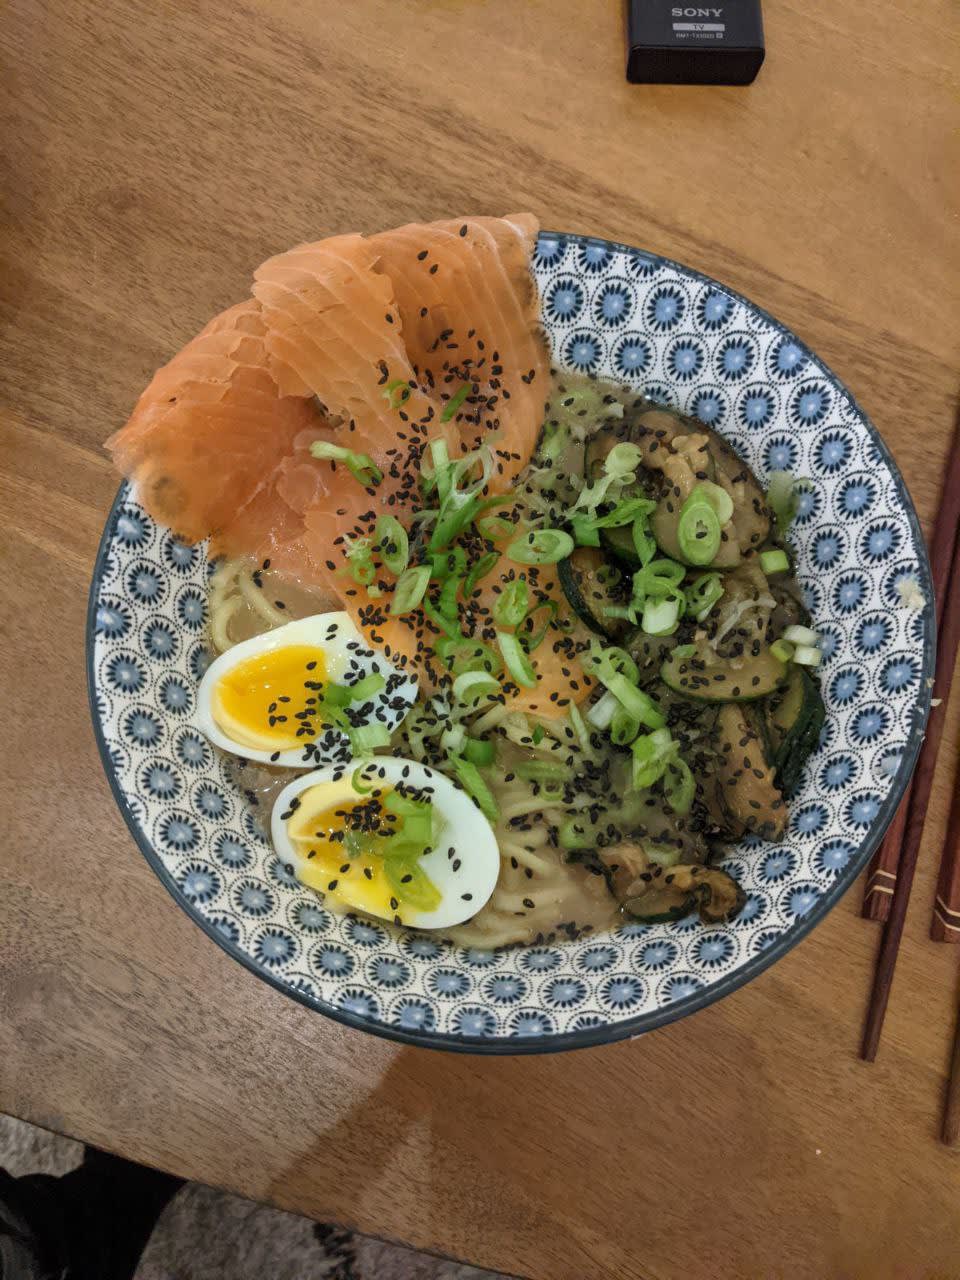 Western Style Ramen from me, the 3rd I made "freestyle". Chicken broth, Soy-ginger-garlic tarree, Zucchini, egg, scallions, leek, salmon as toppings!